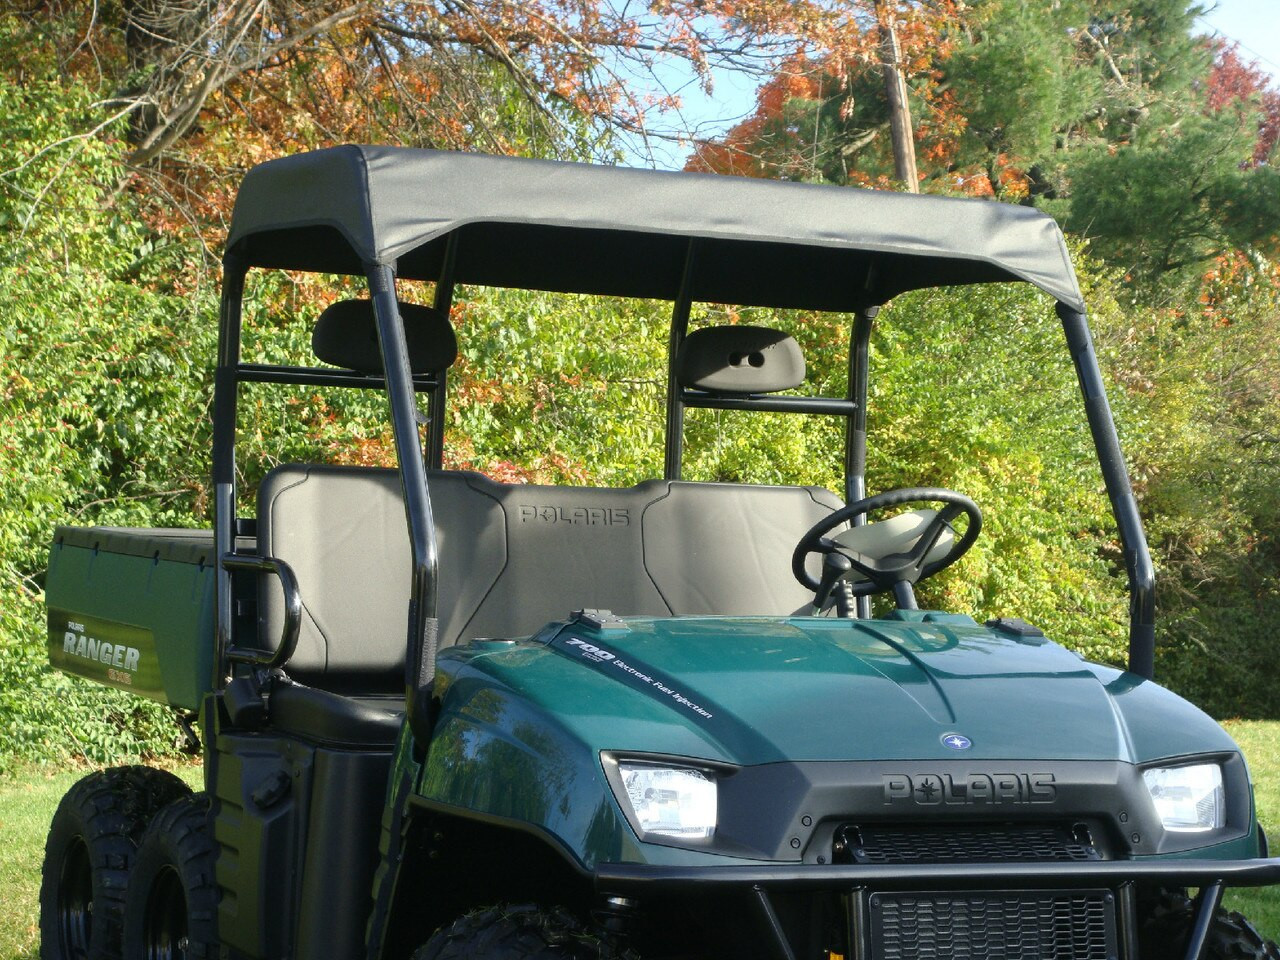 3 Star side x side Polaris Ranger 500 and 700 soft top front view